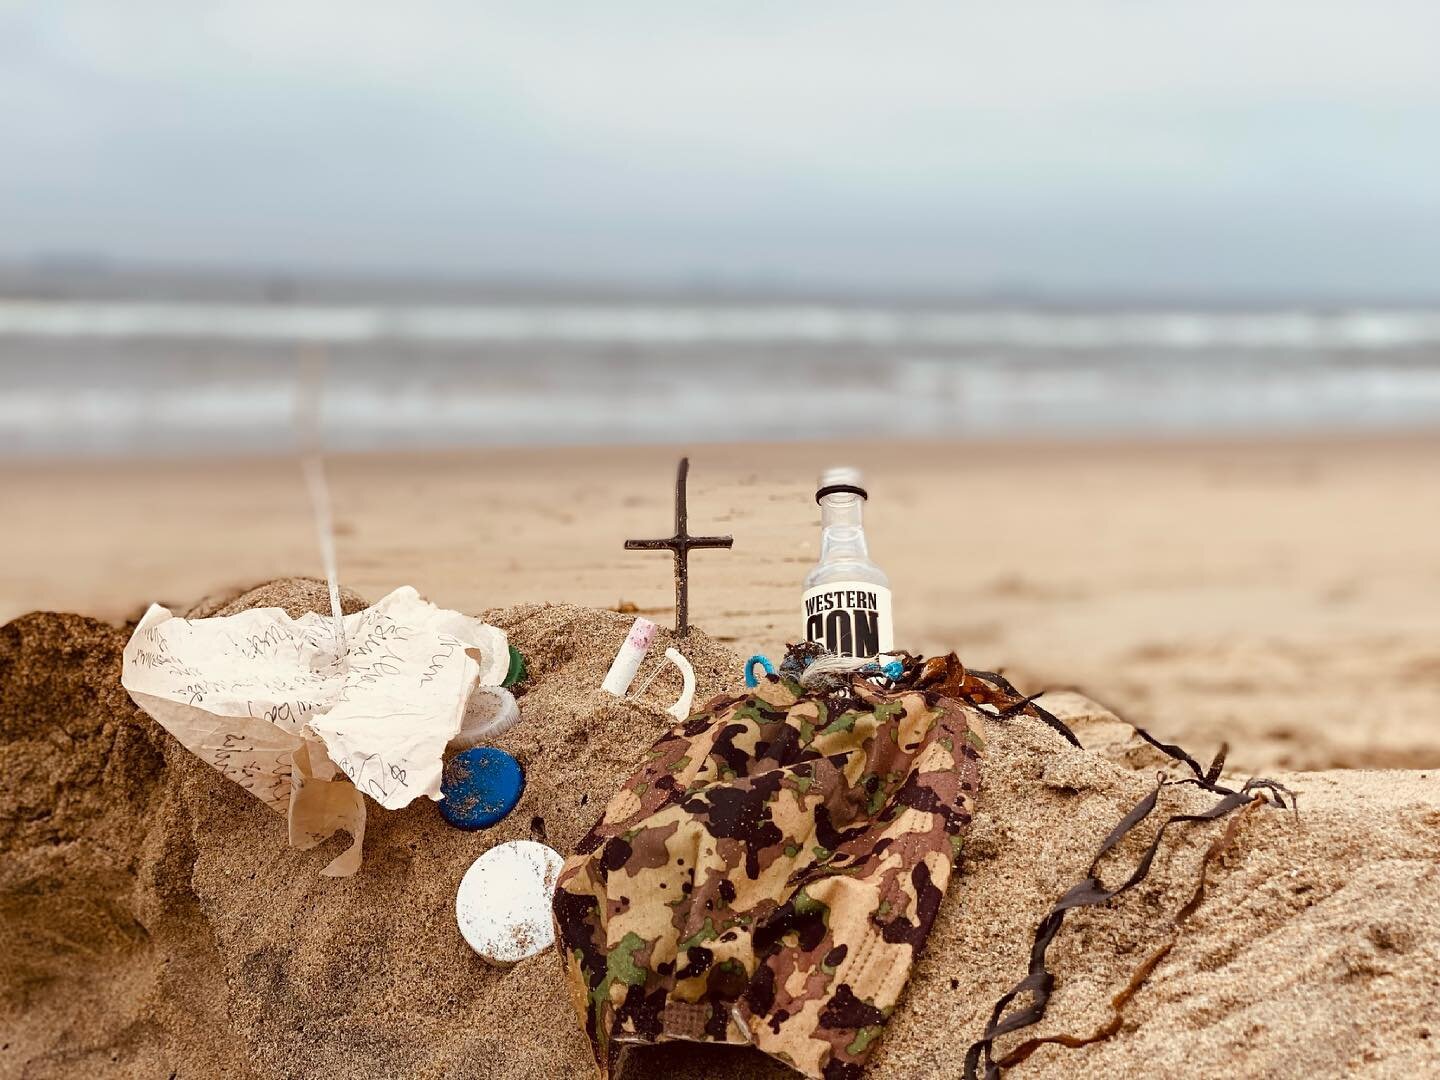 Sometimes I put a visual story together from the items I collected on the beach. You can&rsquo;t predict what you&rsquo;ll find and here are some of the pieces: notes jotted on a piece of paper, a cigarette with lipstick, a mask, a bottle of booze, a